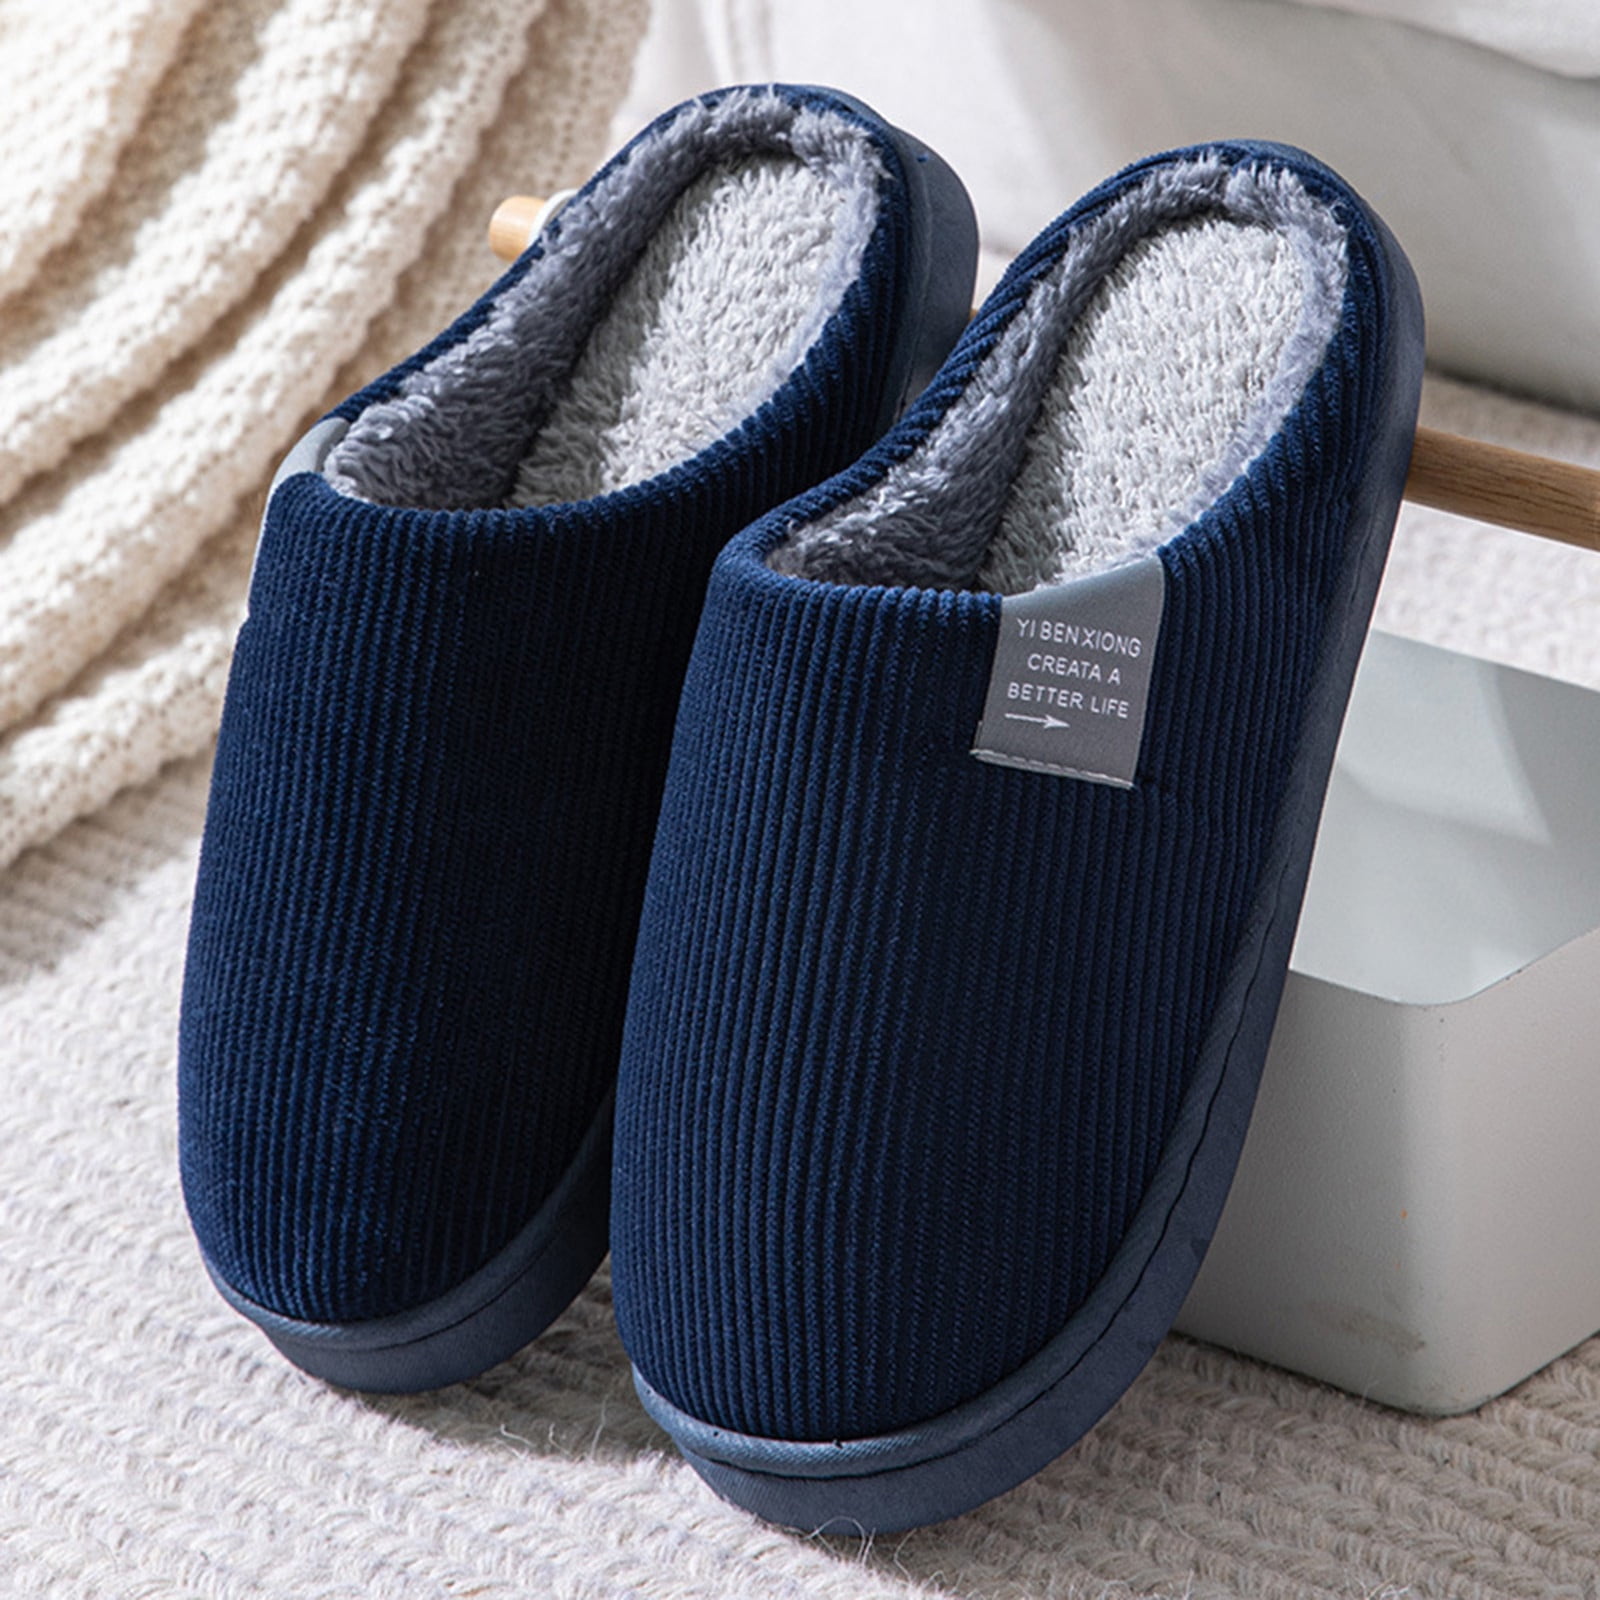 Heated Slippers by Volt Heat